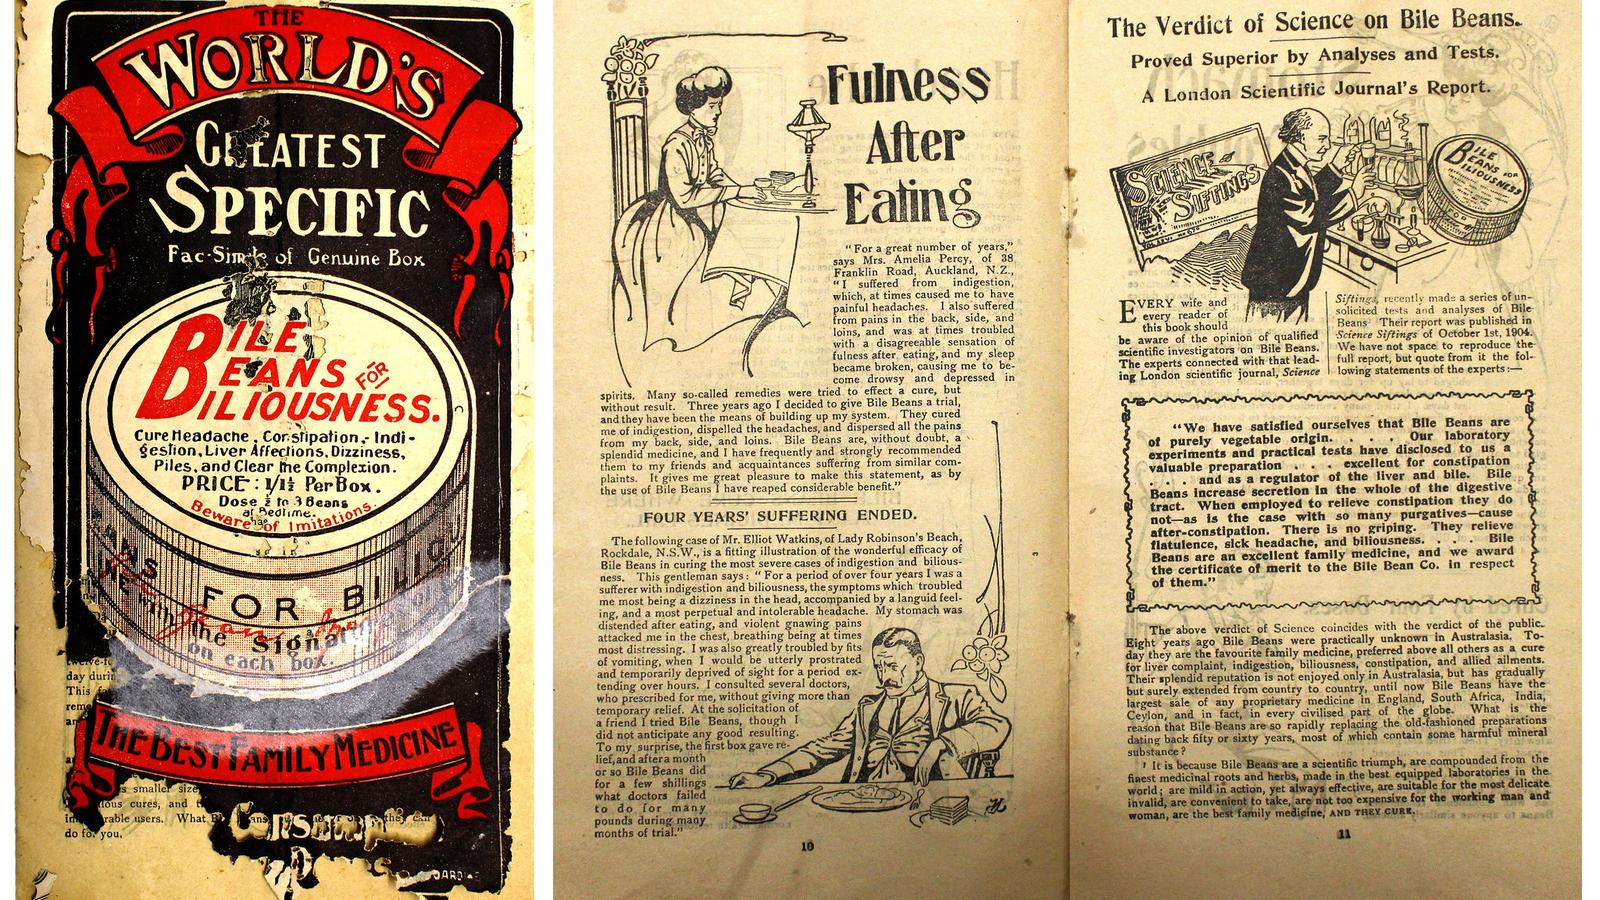 In 1908, New Zealand Parliament passed the Prevention of Quackery Act to defend against claims such as the one featured in this leaflet: "bile beans" that claimed to cure a vareity of ailments, including indigestion, headaches, pimples and sleeplessness.